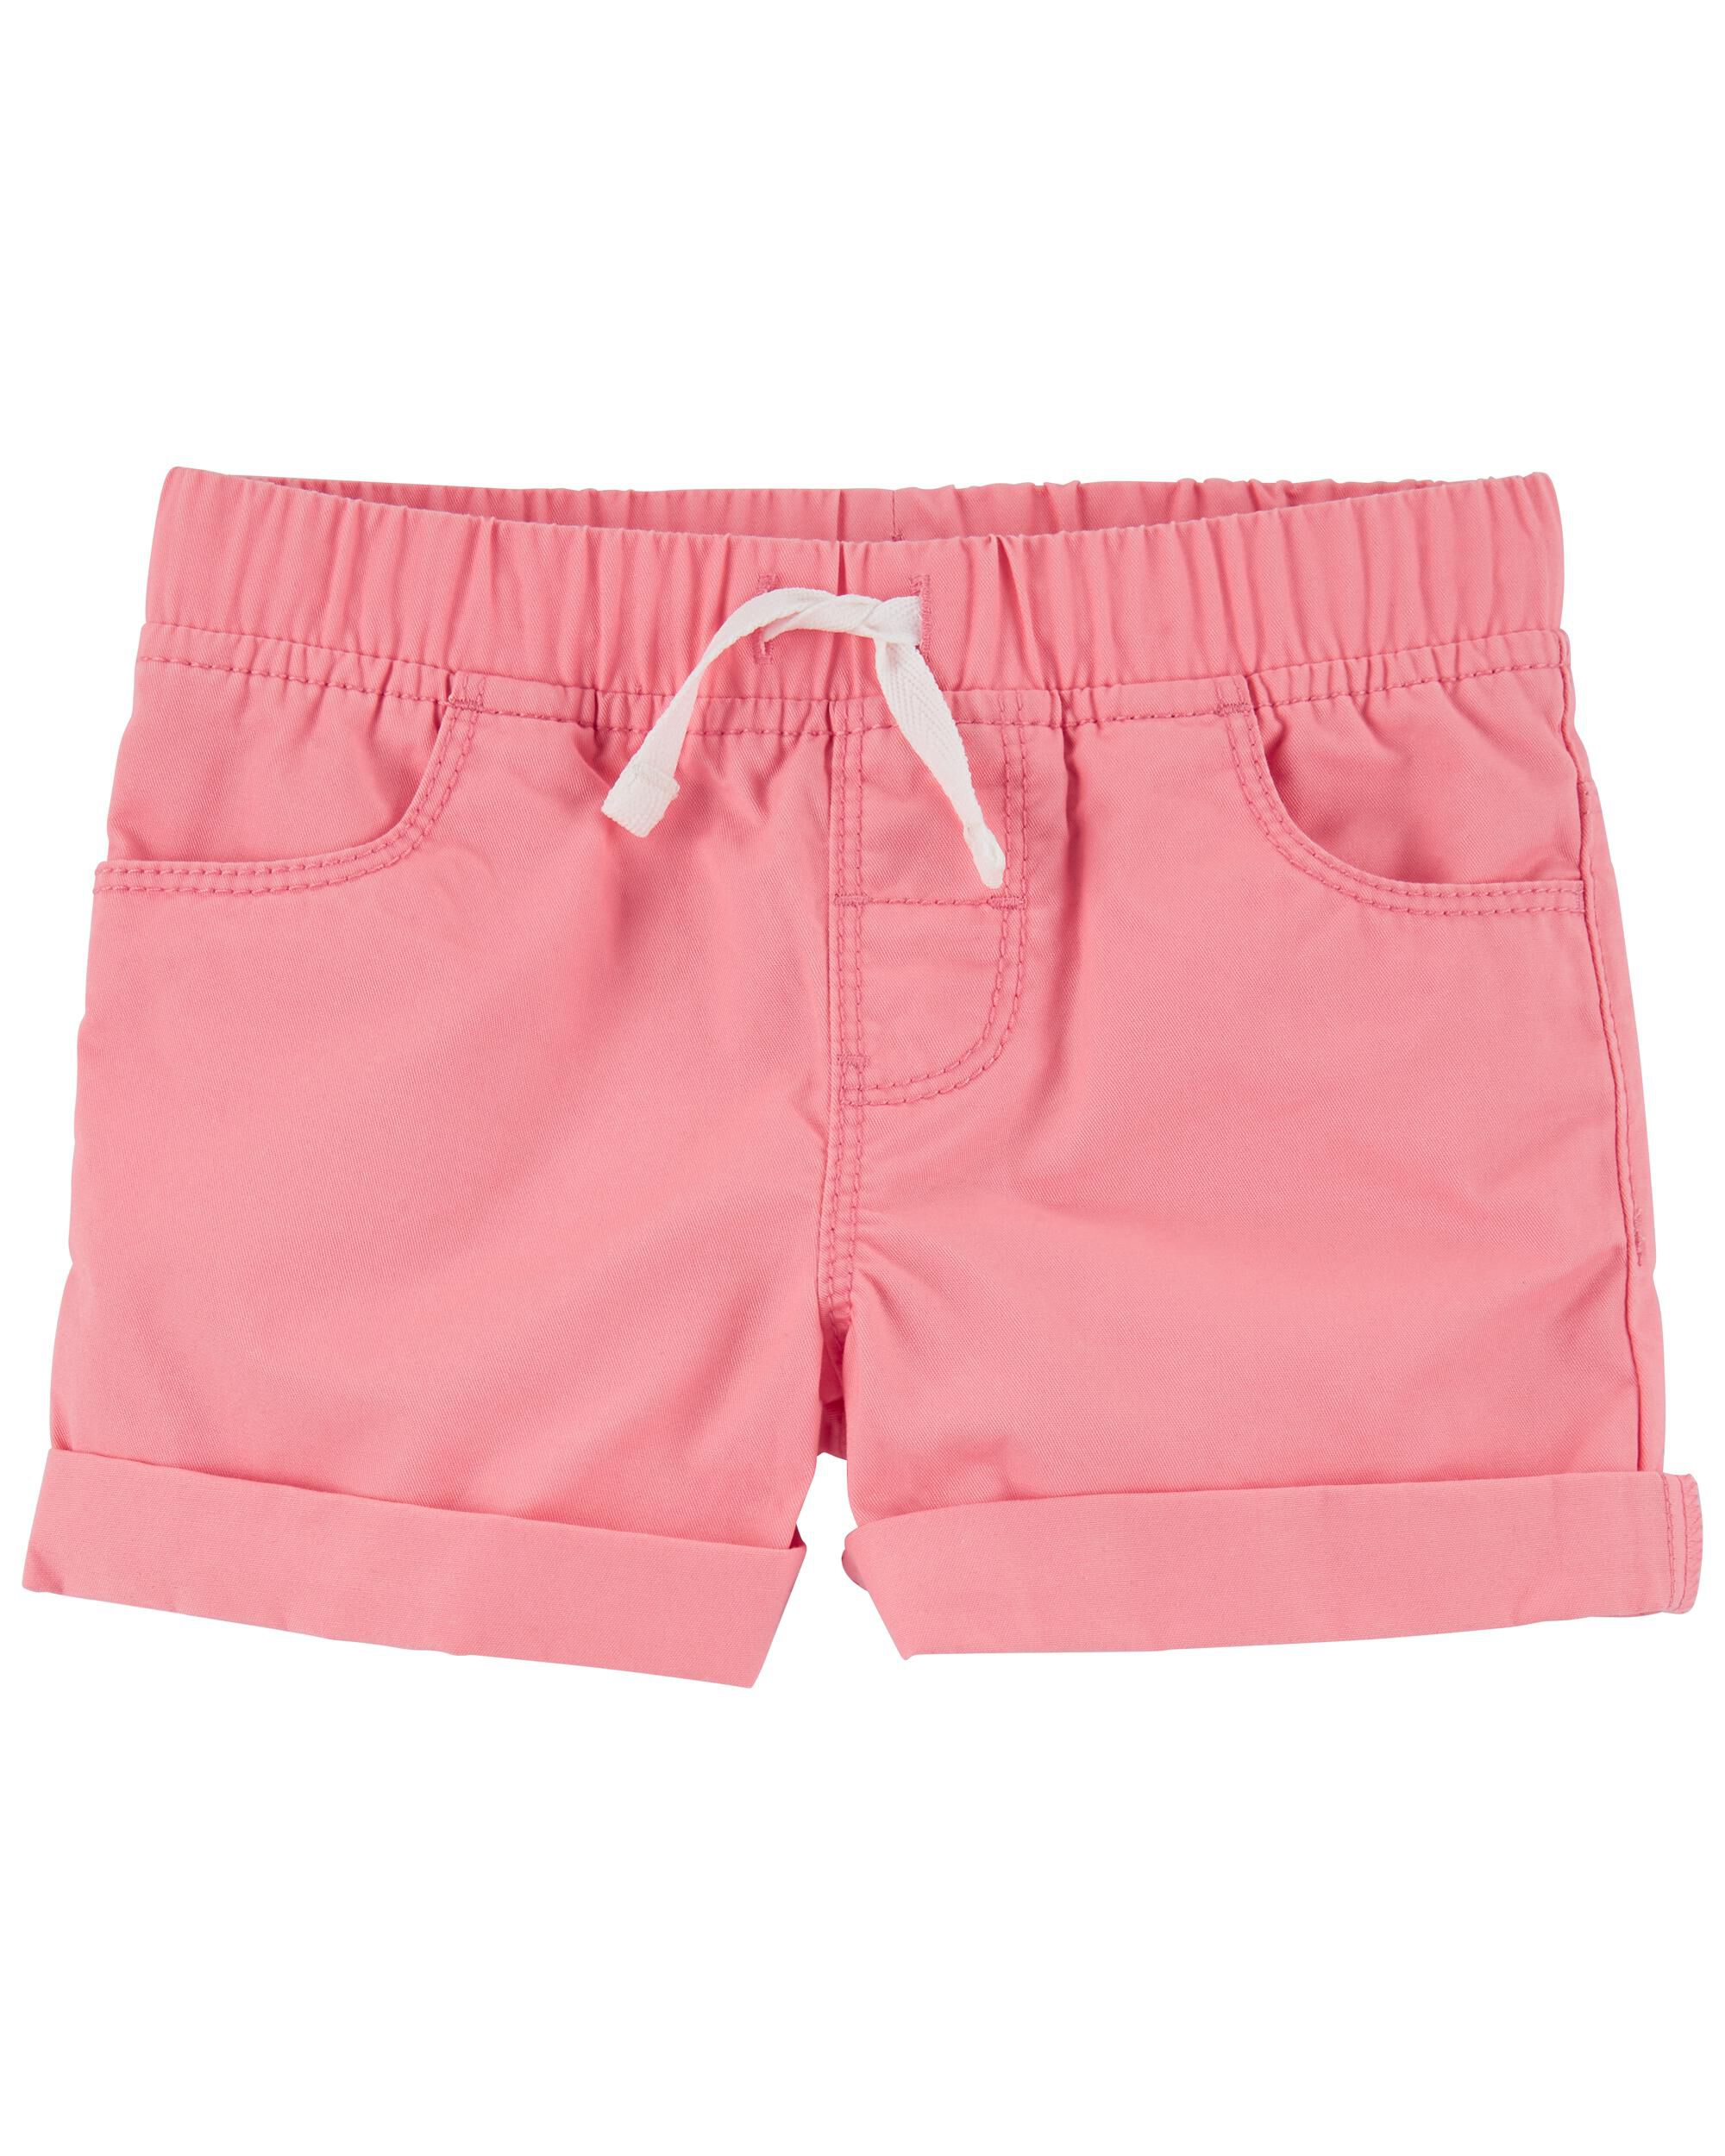 Carters Pull-On Shorts